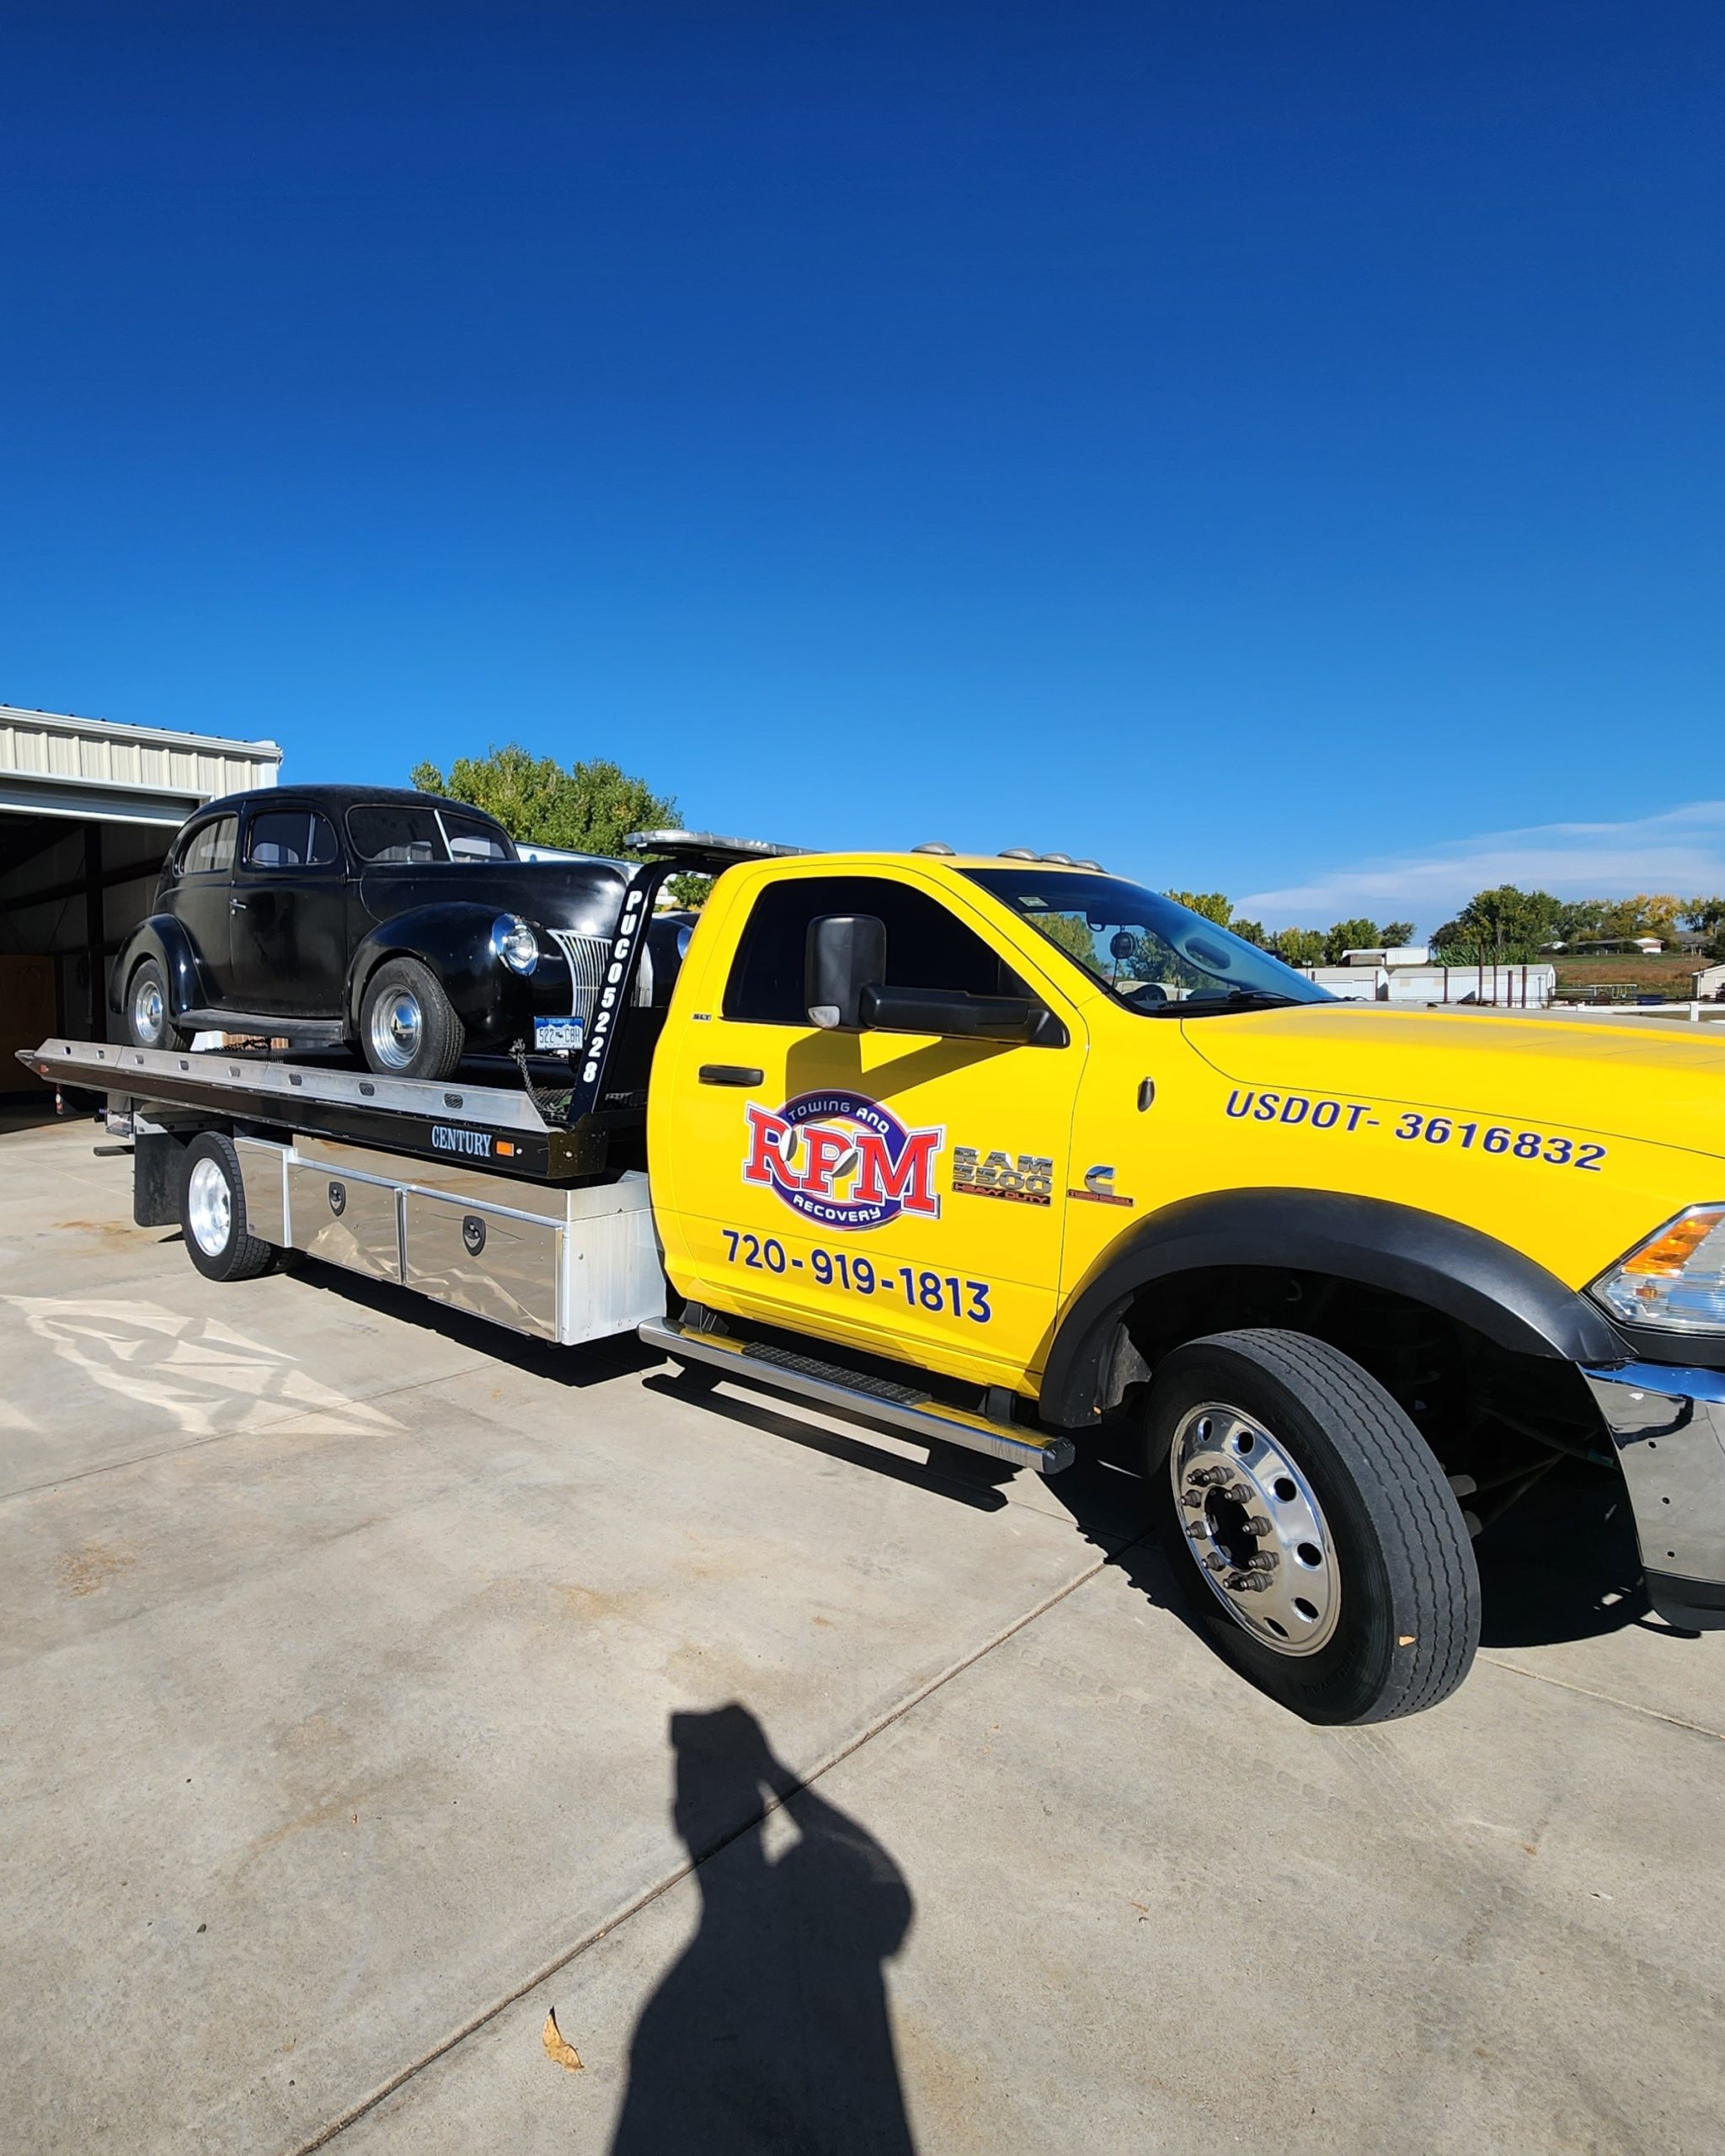 this image shows towing and recovery services in Aurora, CO